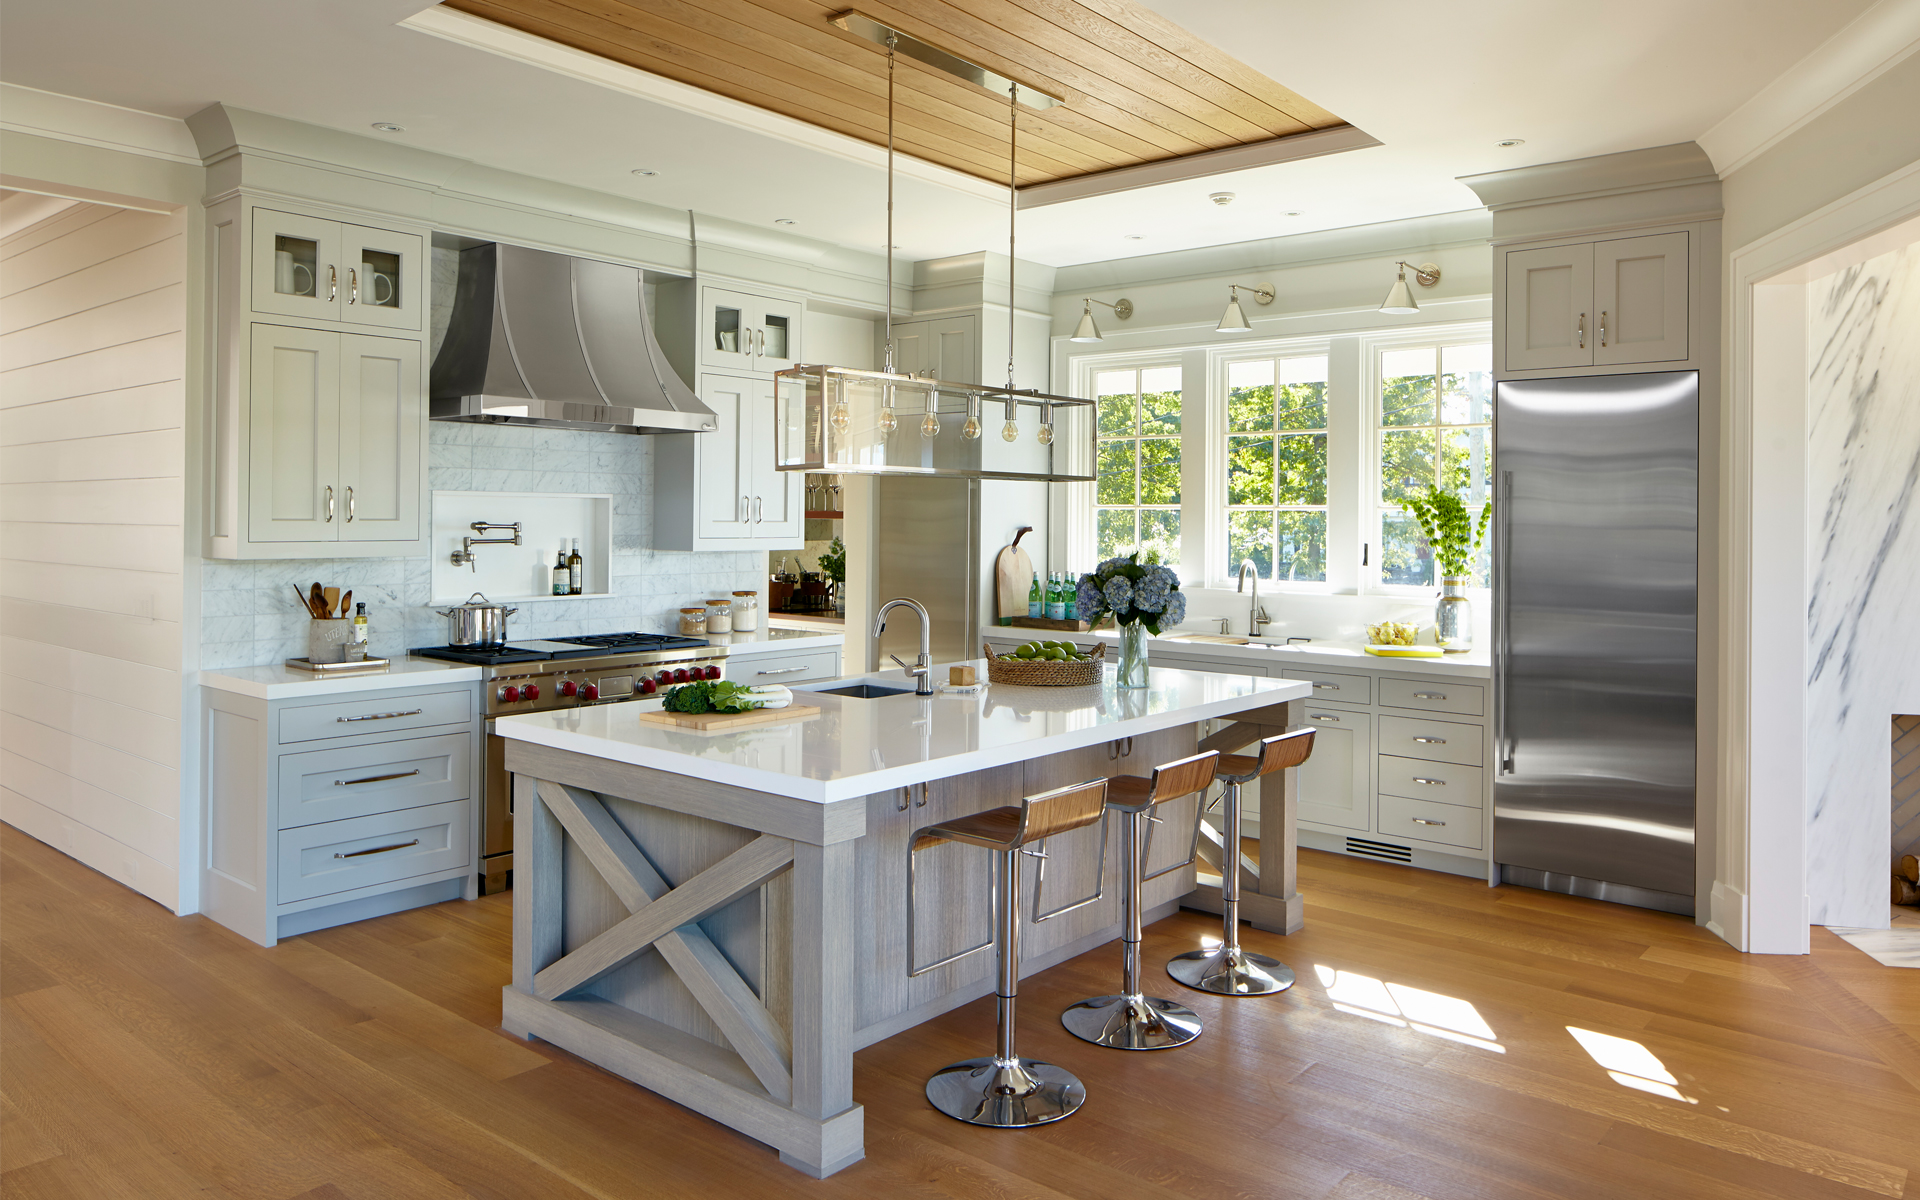 DEANE Inc kitchen designed with custom cabinetry and a breakfast bar with countertop stools.